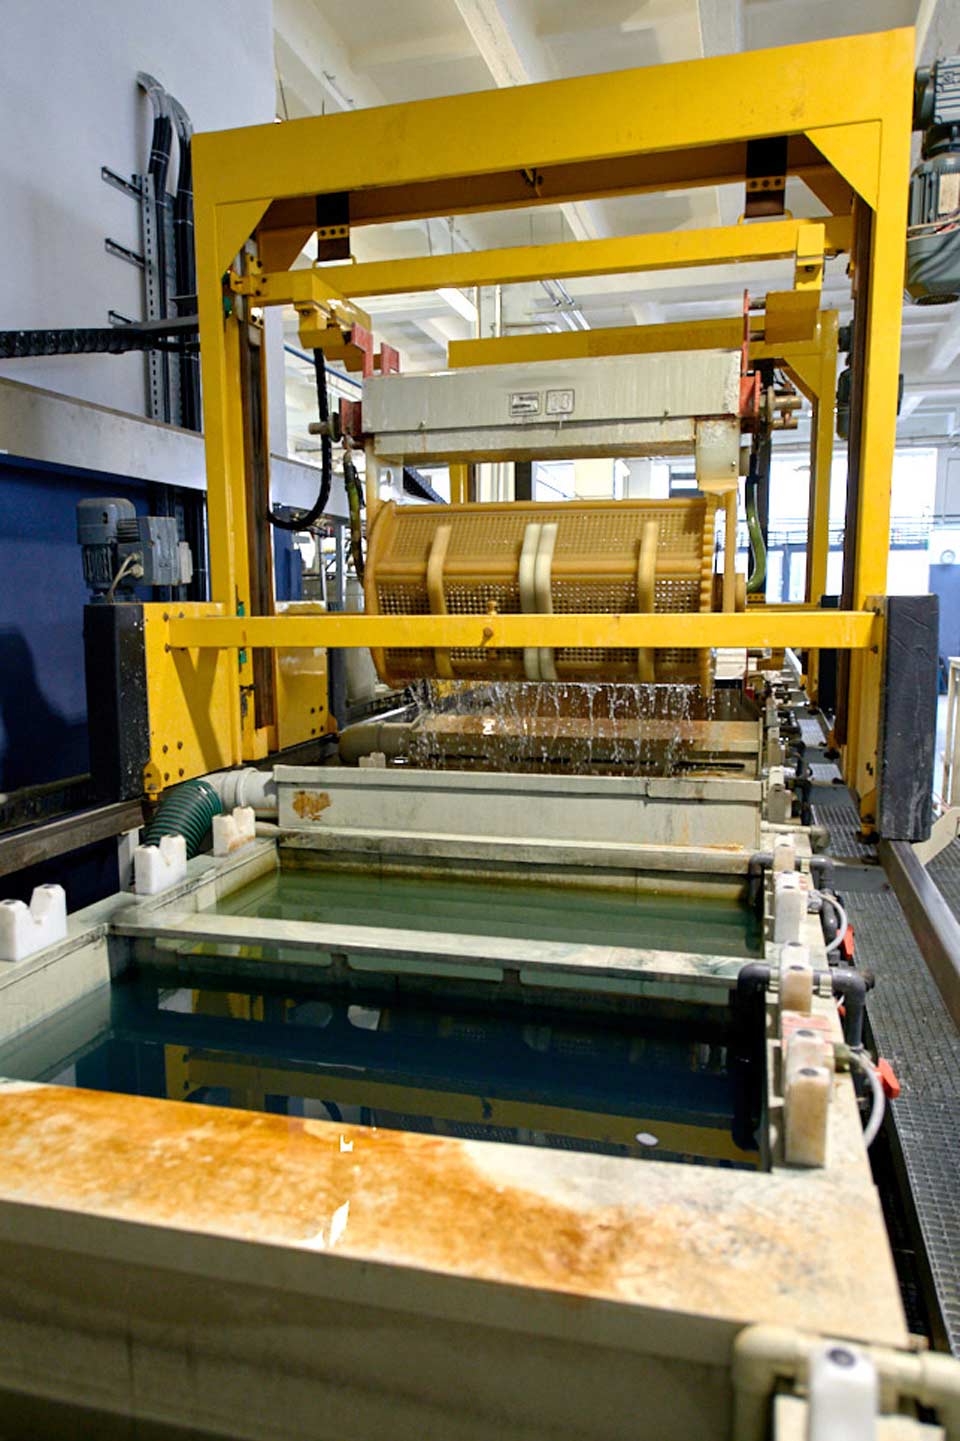 The individual electroplating processes take place in large pools.